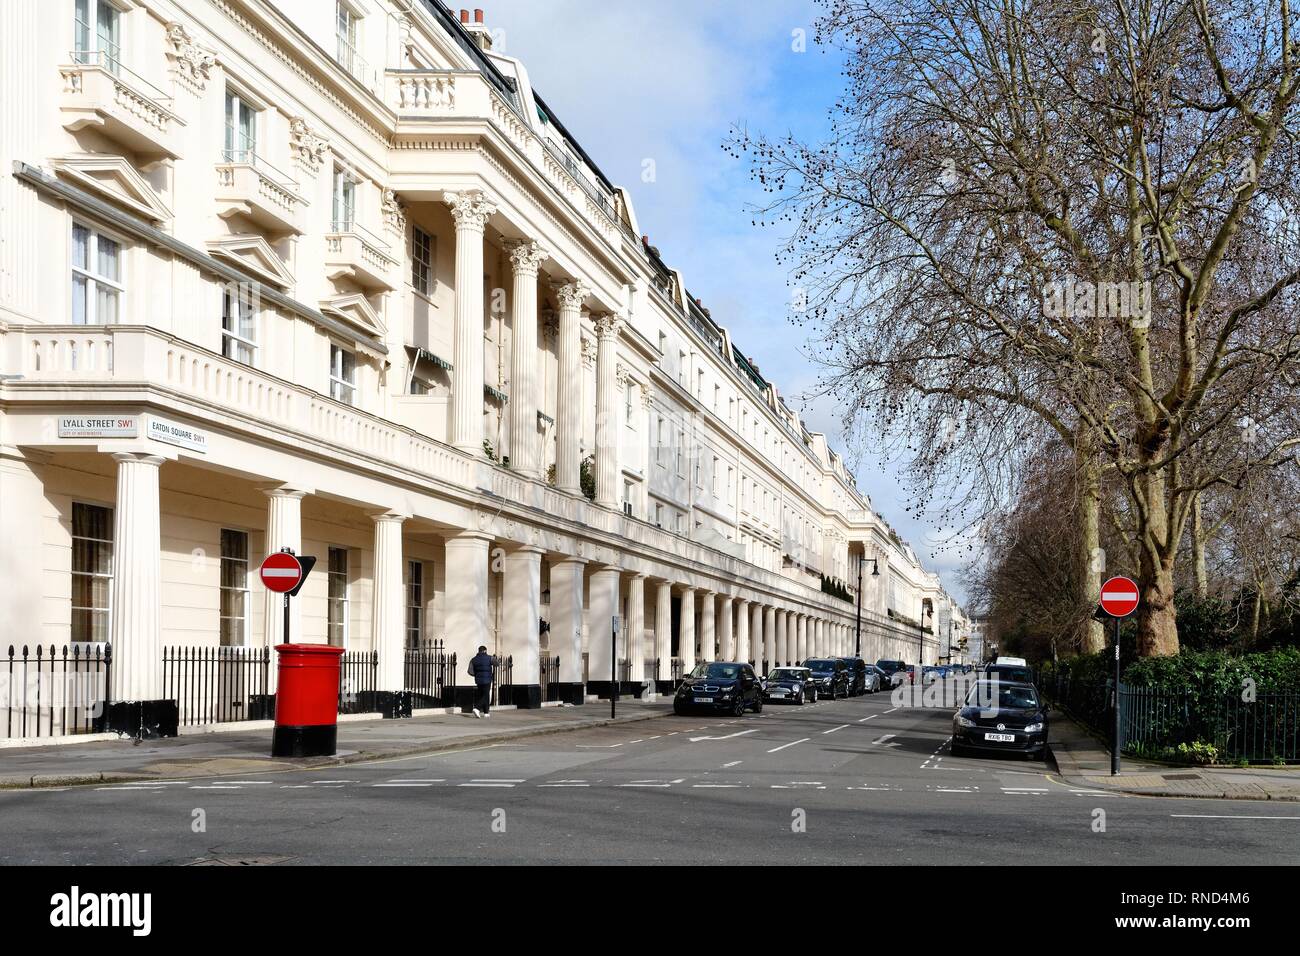 Exclusive residential homes in Eaton Square Belgravia Central London England UK Stock Photo